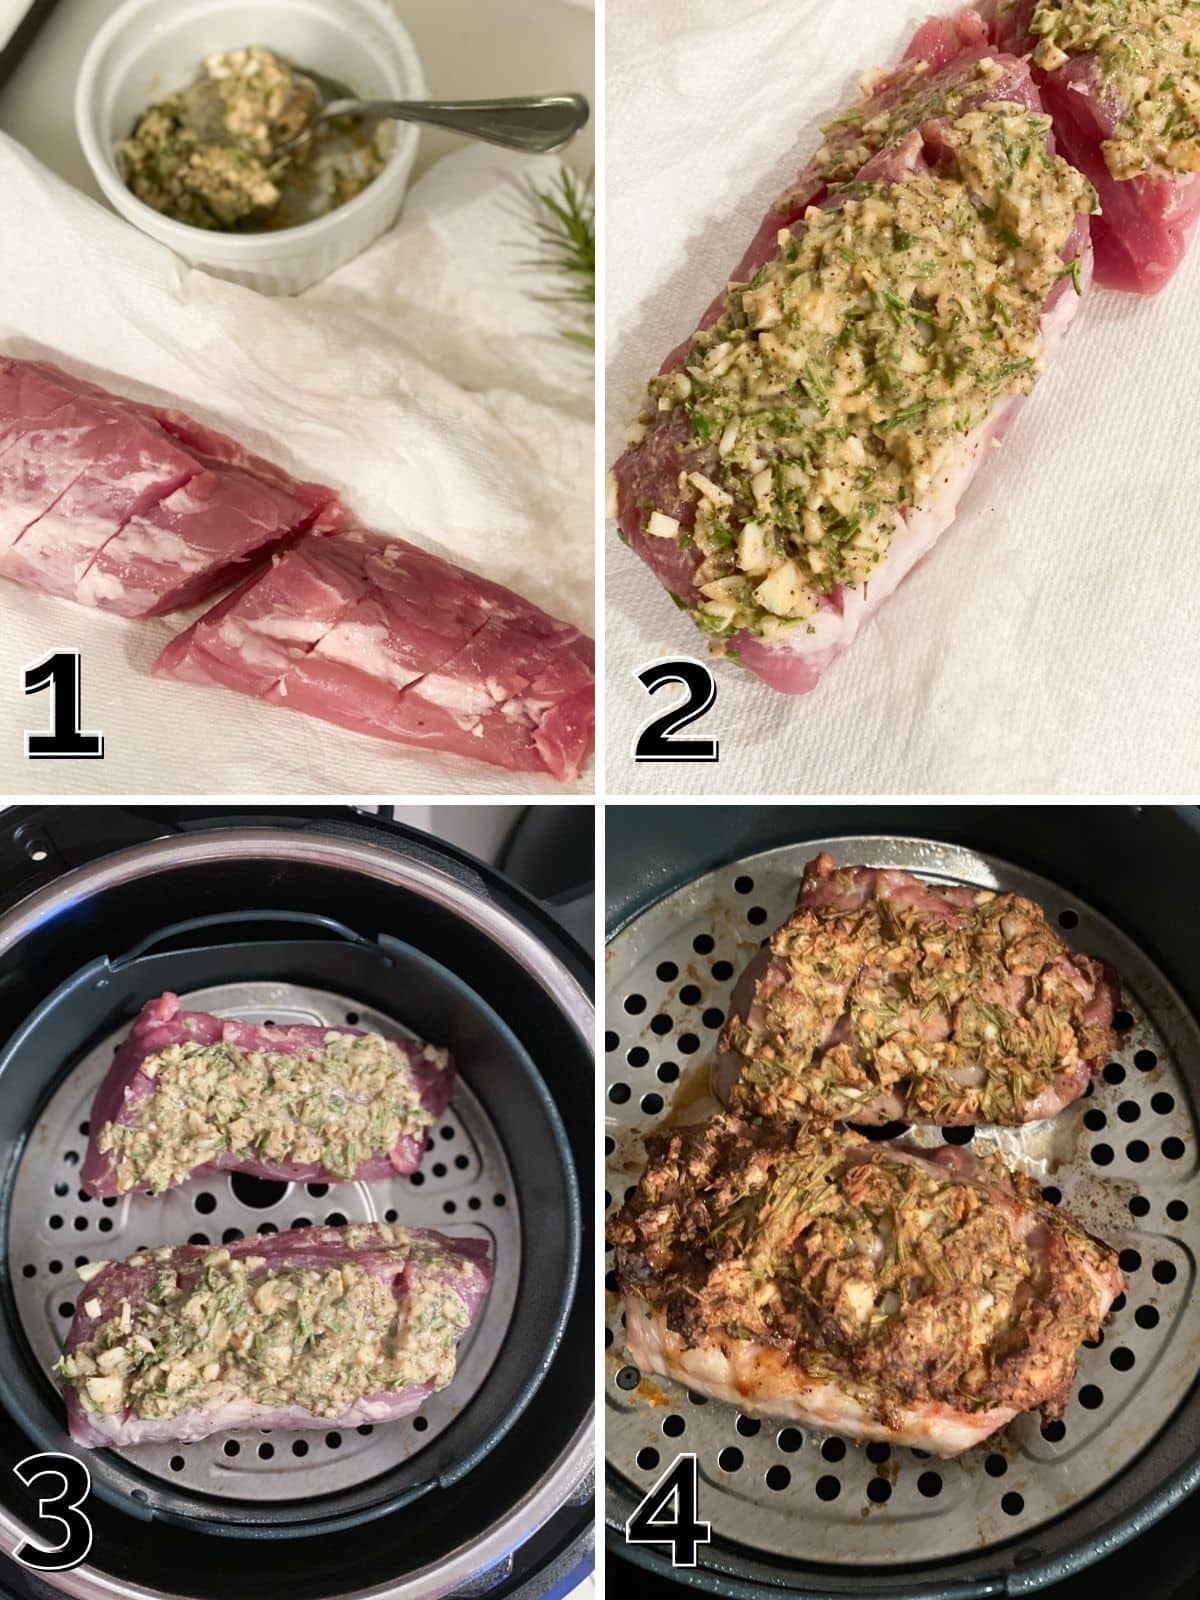 A step by step process of mixing the dijon sauce, applying it to the pork tenderloin, and air frying. 